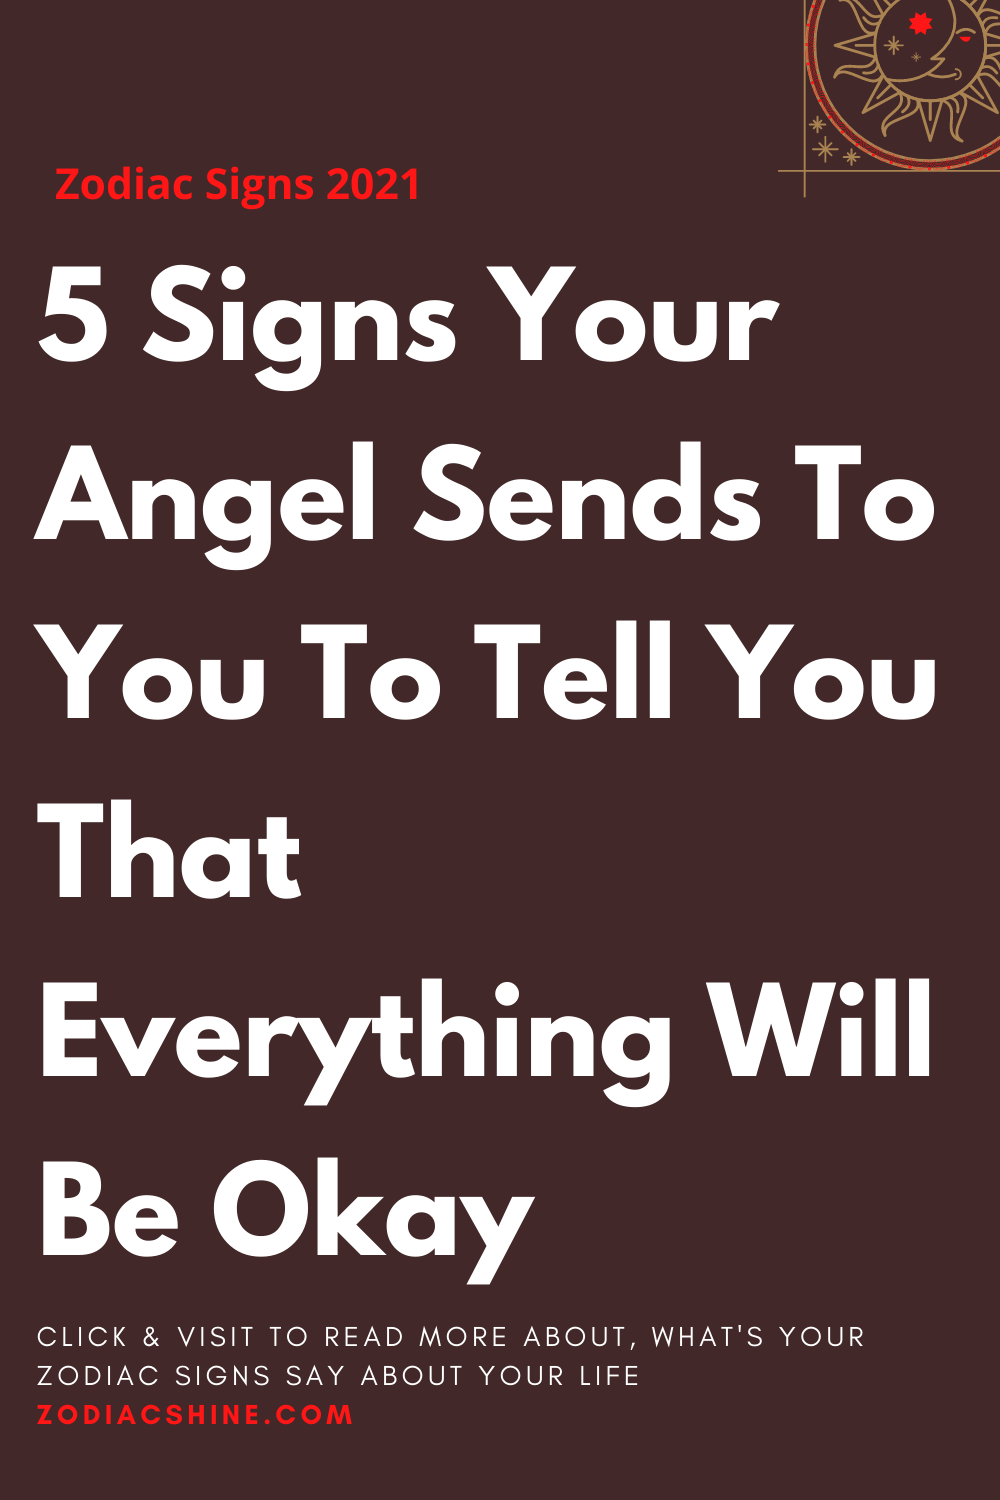 5 Signs Your Angel Sends To You To Tell You That Everything Will Be Okay